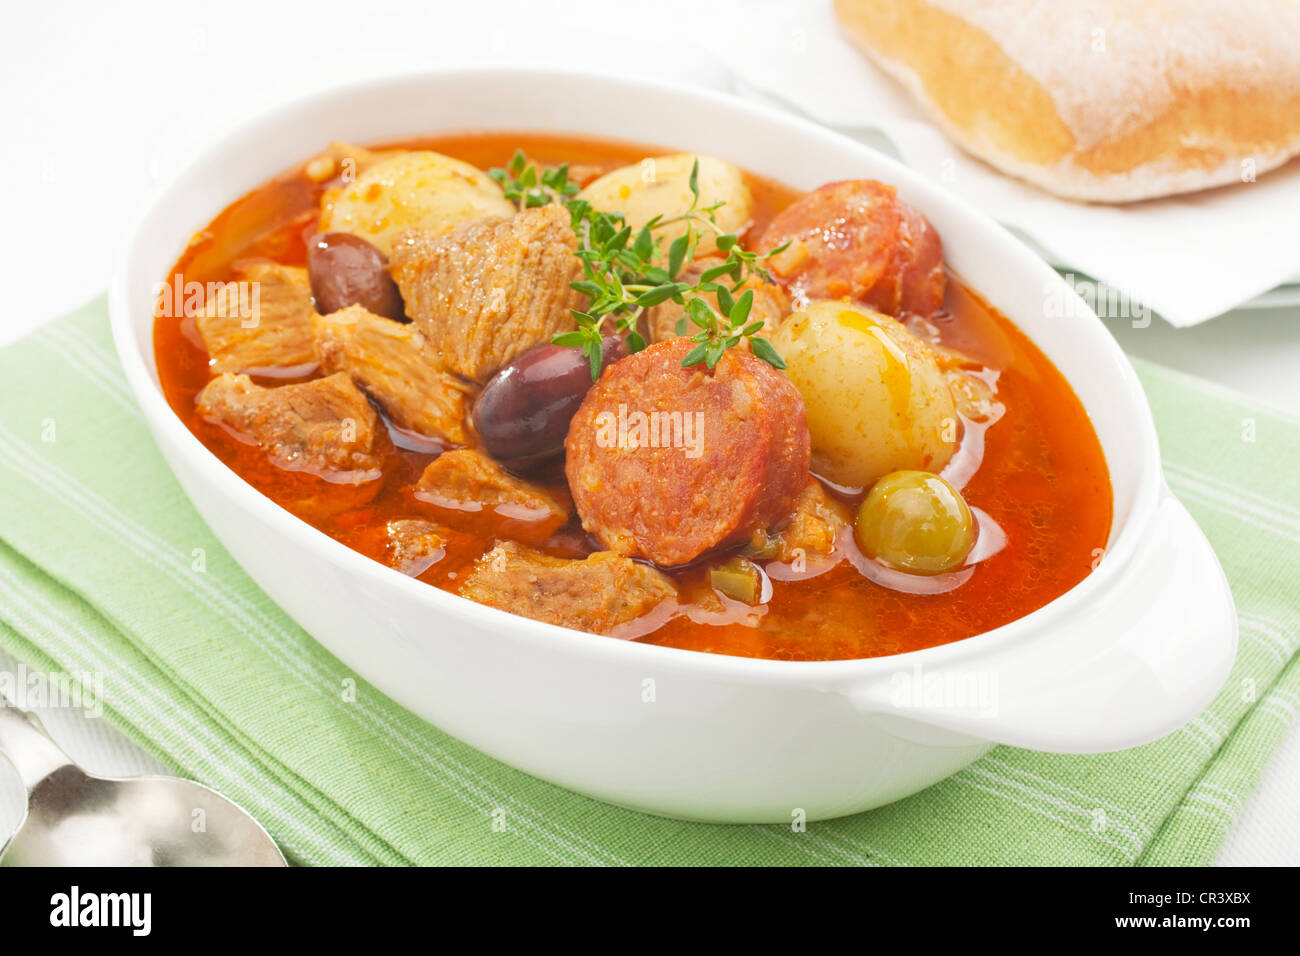 A Spanish stew, pork and chorizo casserole, with potatoes, tomatoes, peppers, olives and white wine. Stock Photo